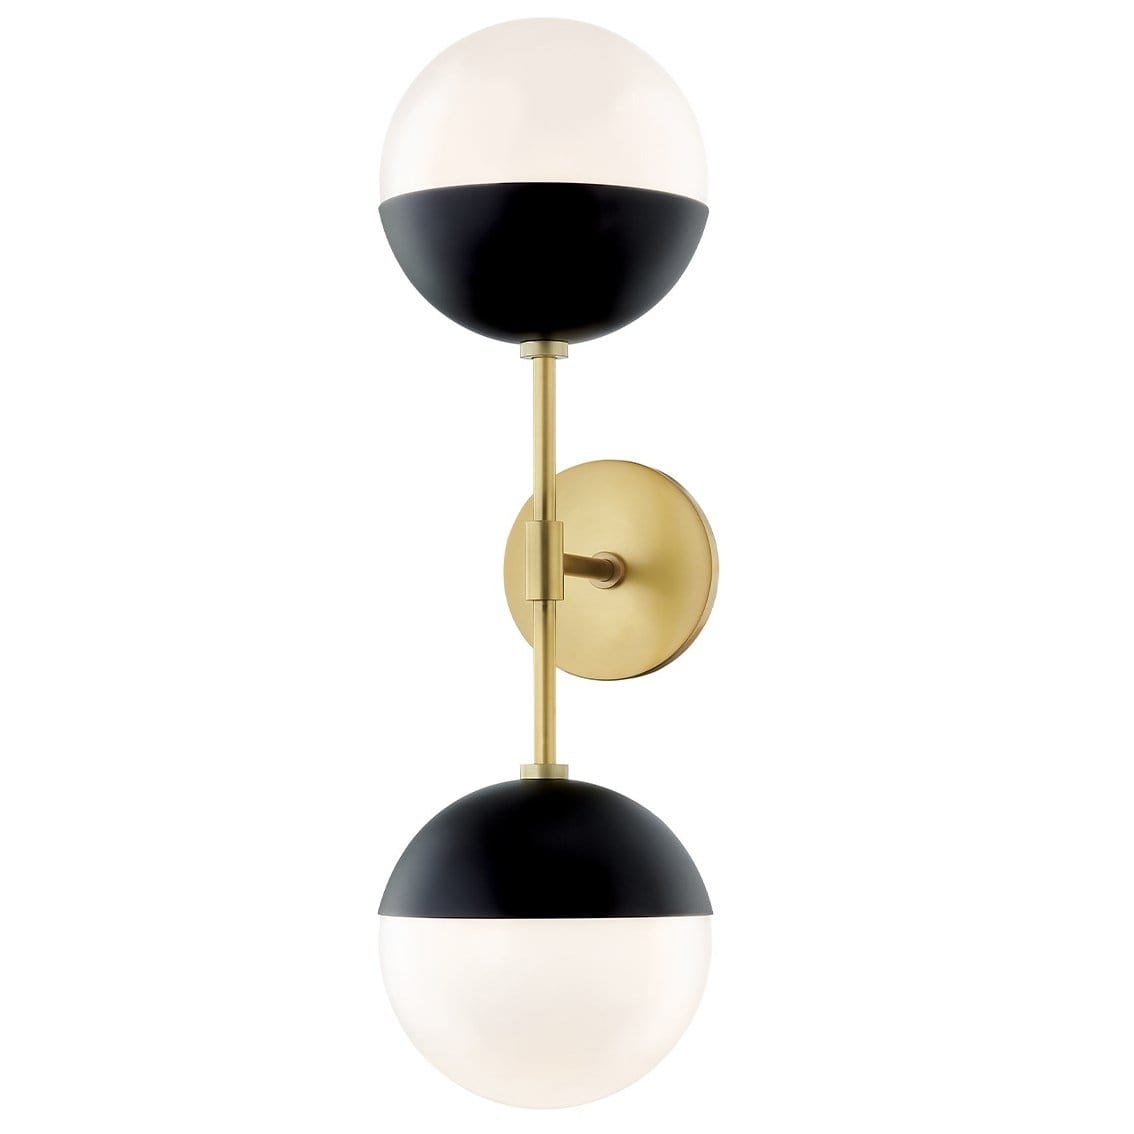 Mitzi Renee Double Wall Sconce - Aged Brass/Black Lighting mitzi-H344102A-AGB/BK